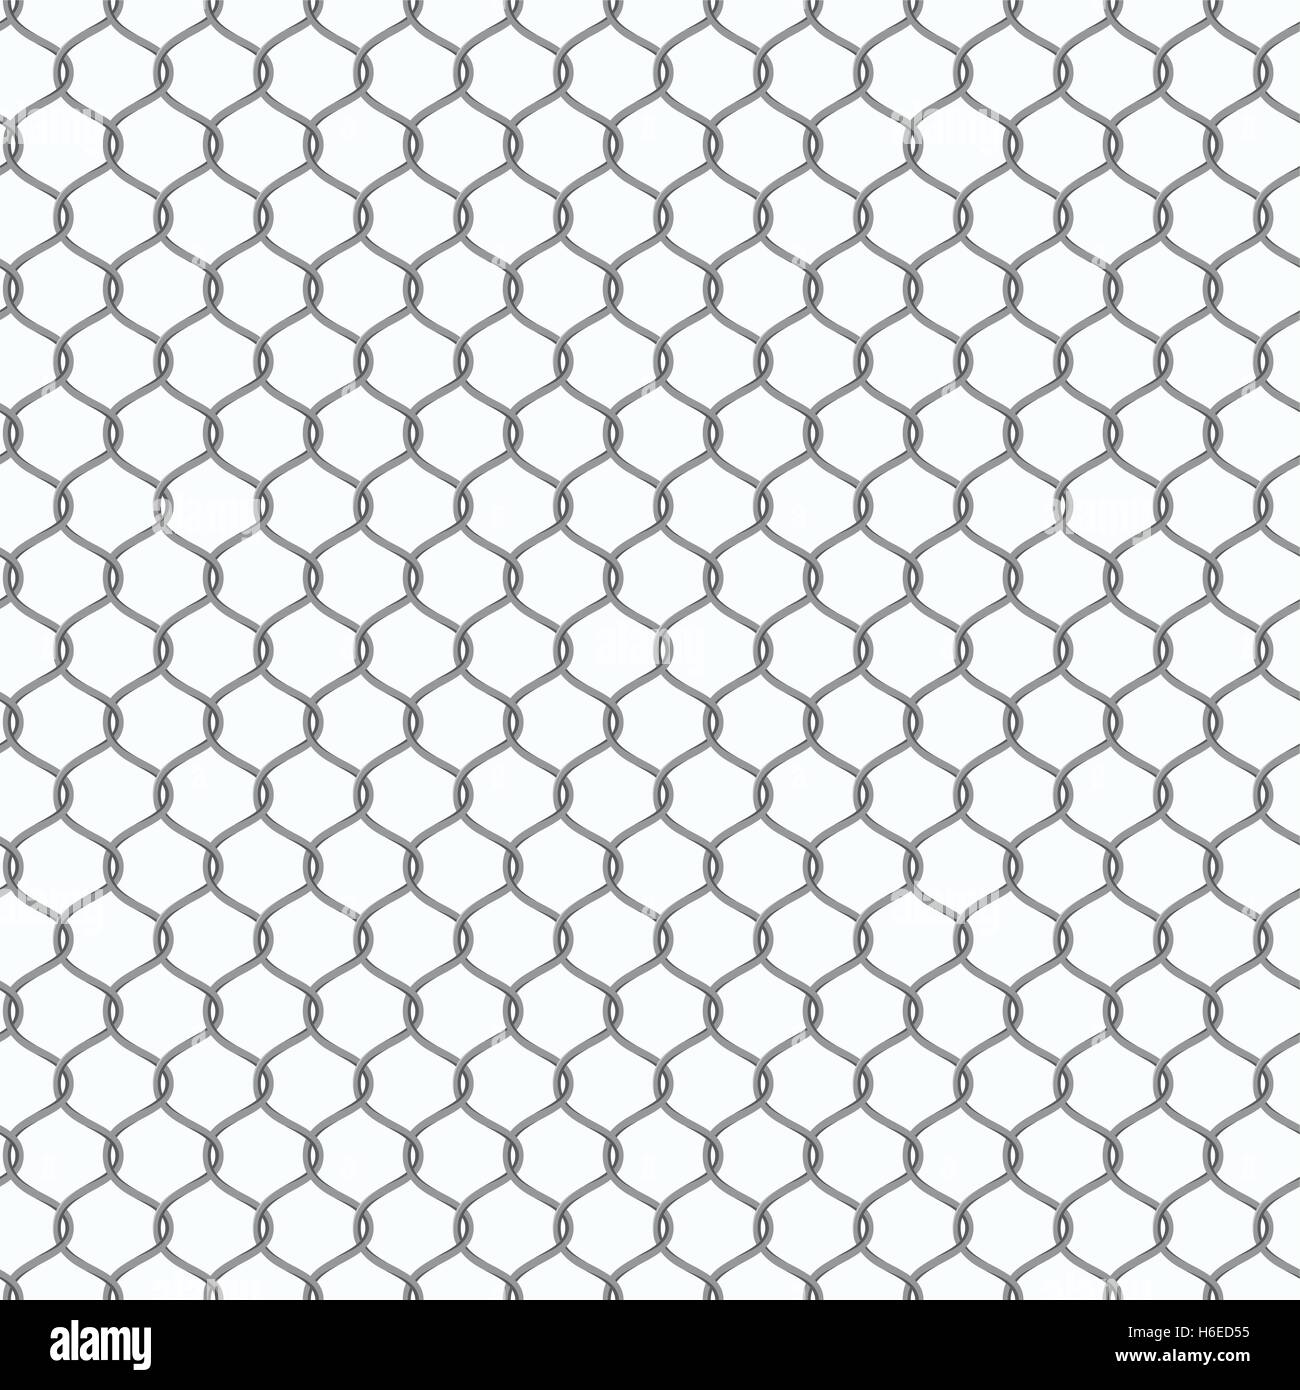 Chain-link fencing pattern Stock Vector